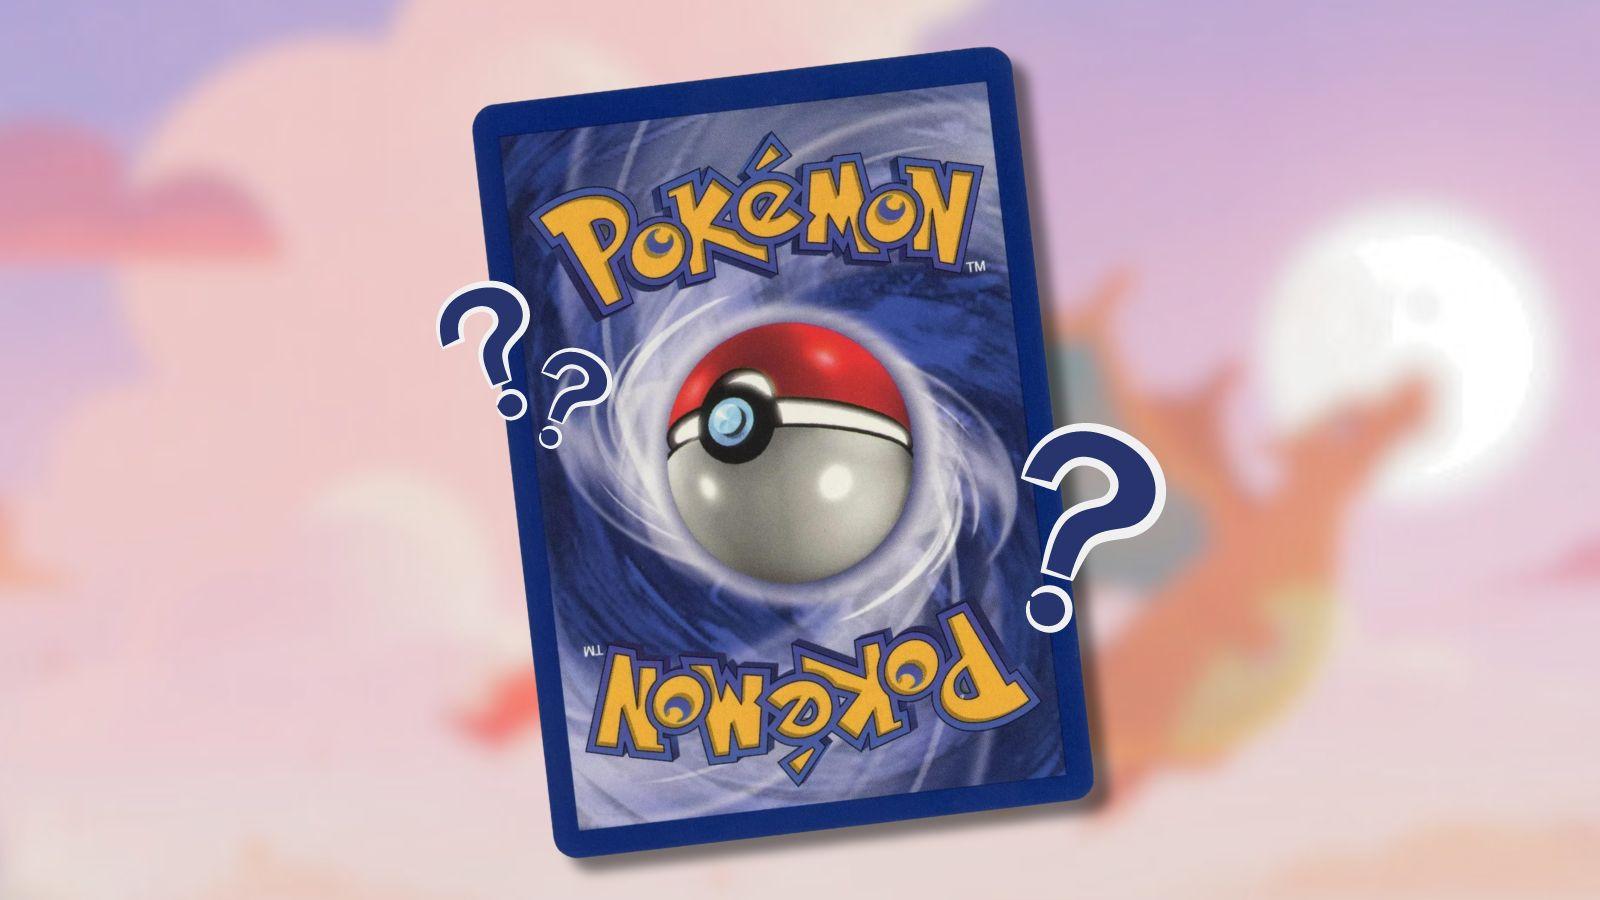 Pokemon card with question marks and Charizard background.